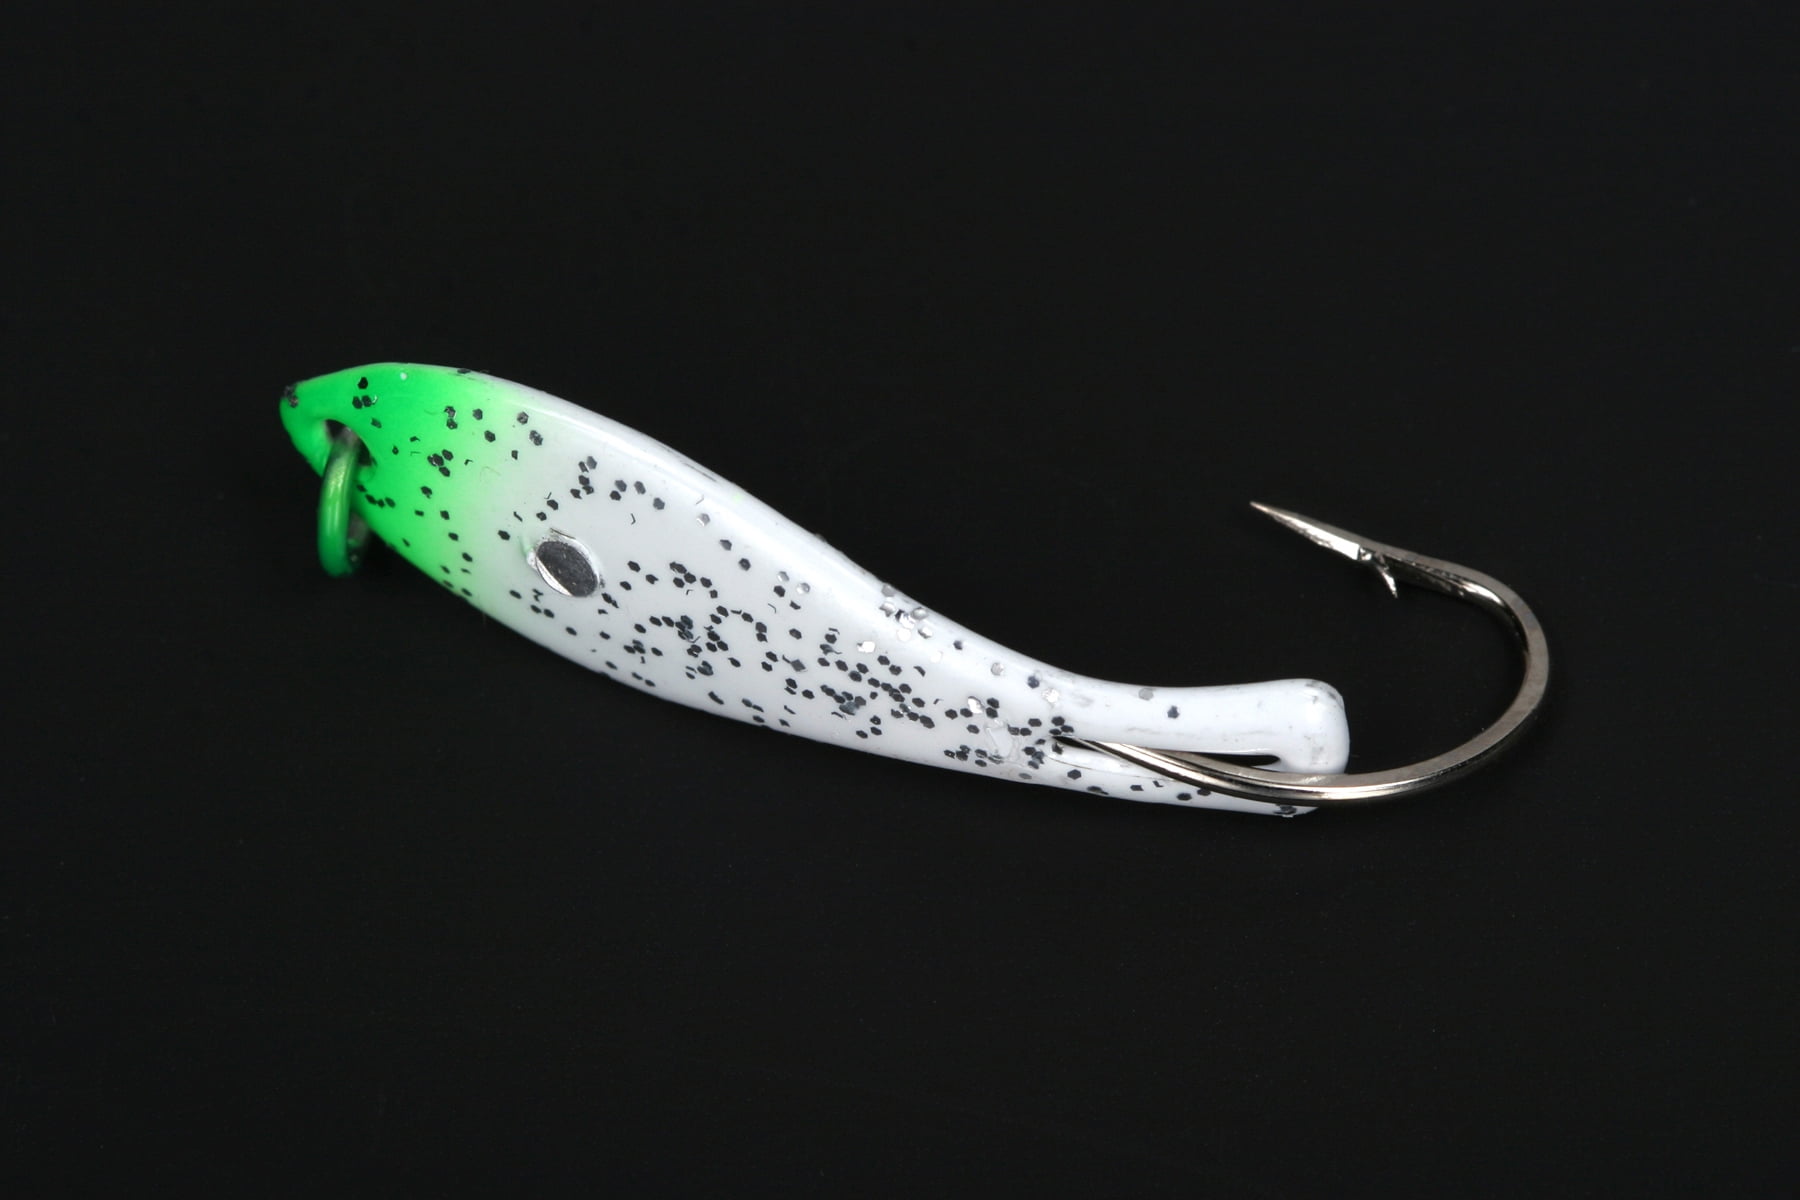 Nungesser 1 1/2 Saltwater Painted Shad Spoon Fishing Lure, Green & White,  1/16 oz., 30GLO-2GW